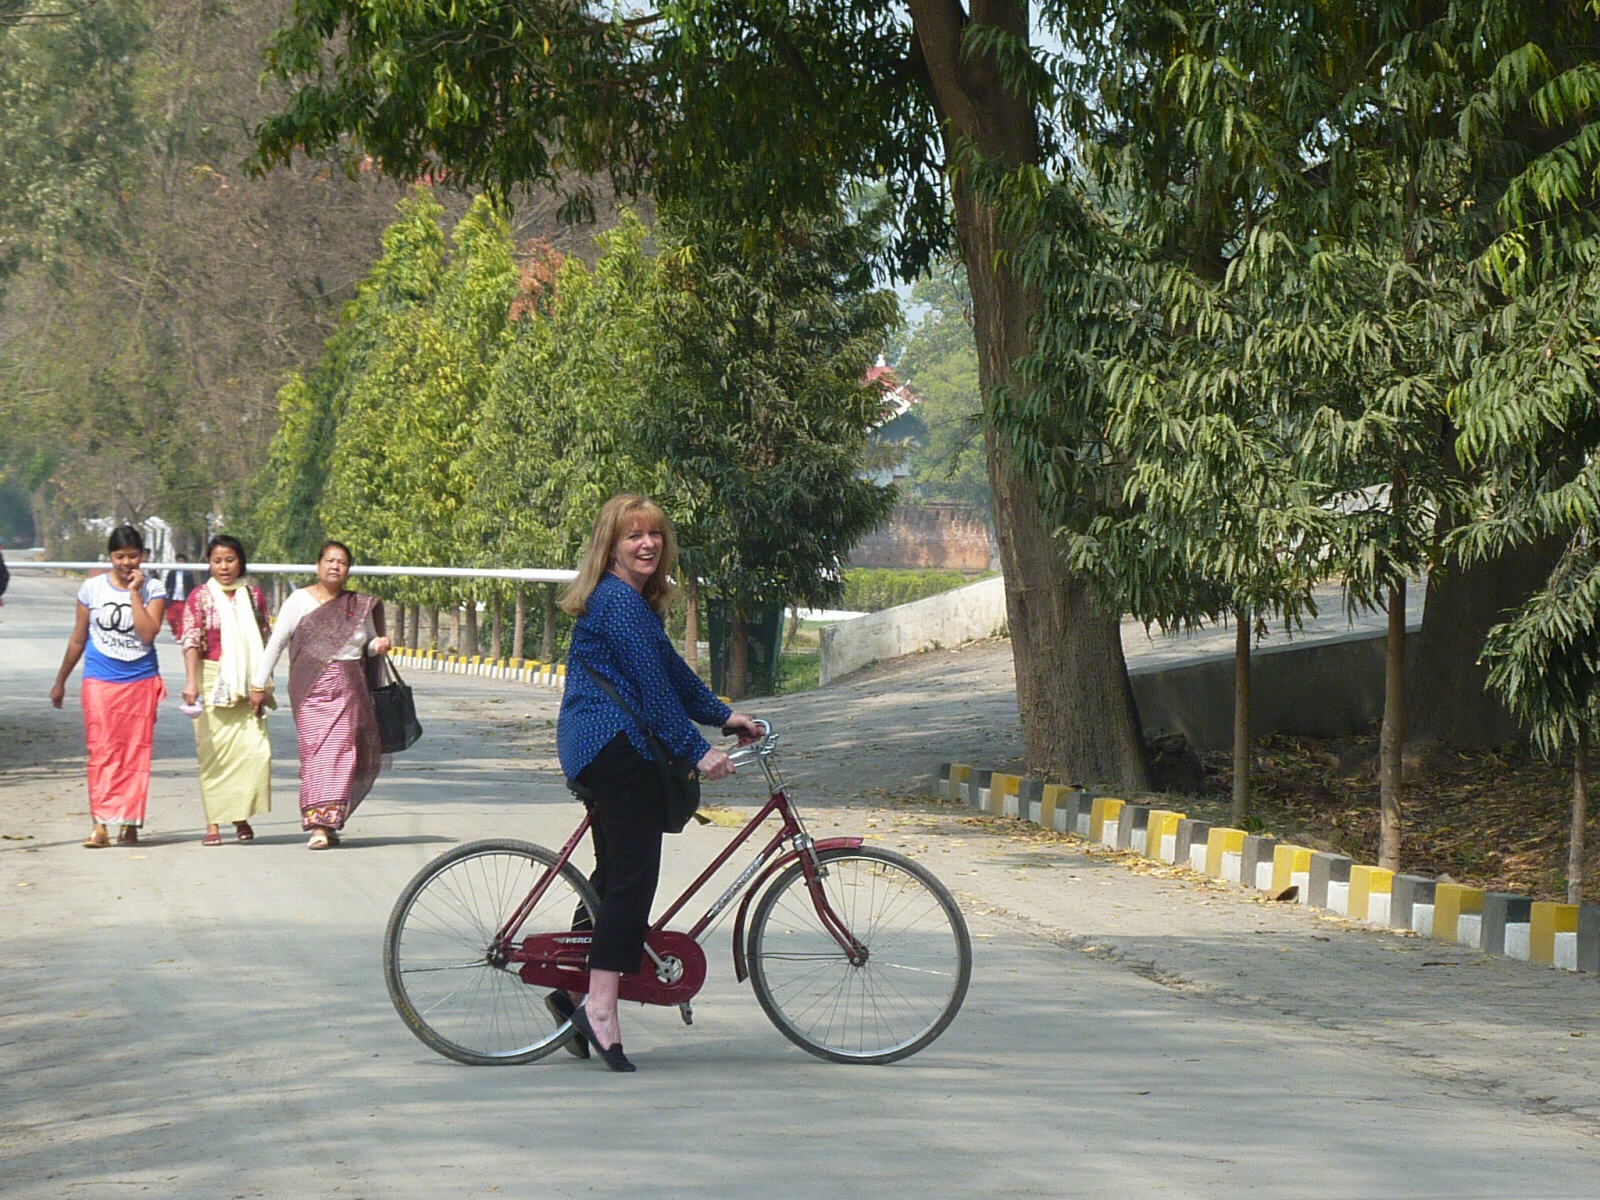 On a bike in Kangla Fort, Imphal, Manipur state, India